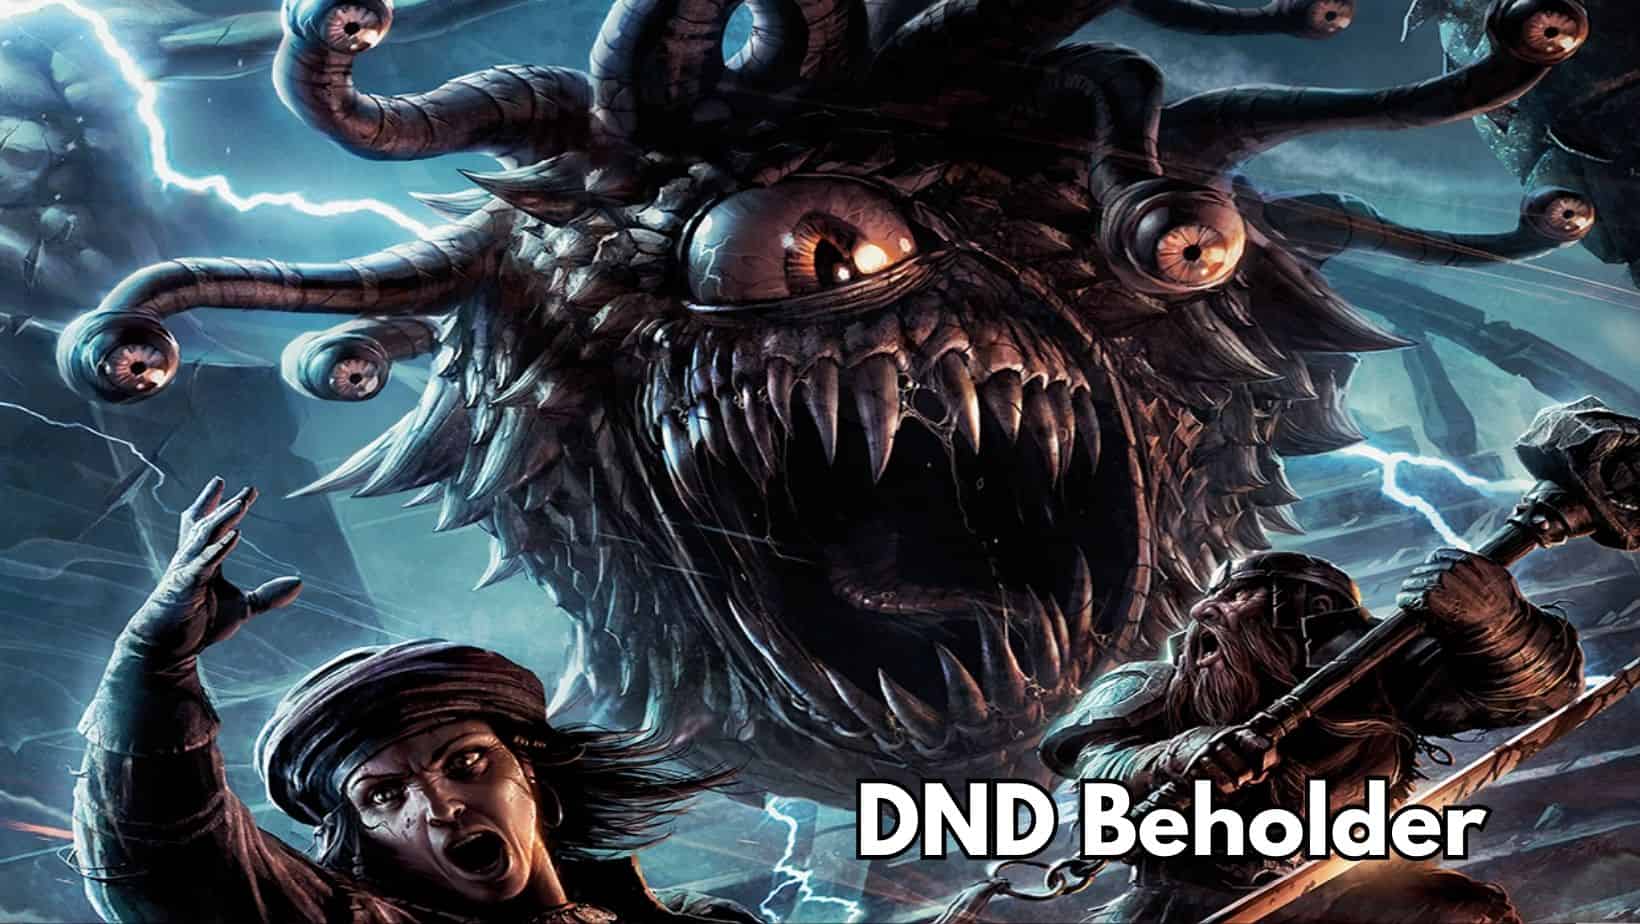 Dungeons and Dragons Beholder: An Iconic DND Monster - LitRPG Reads